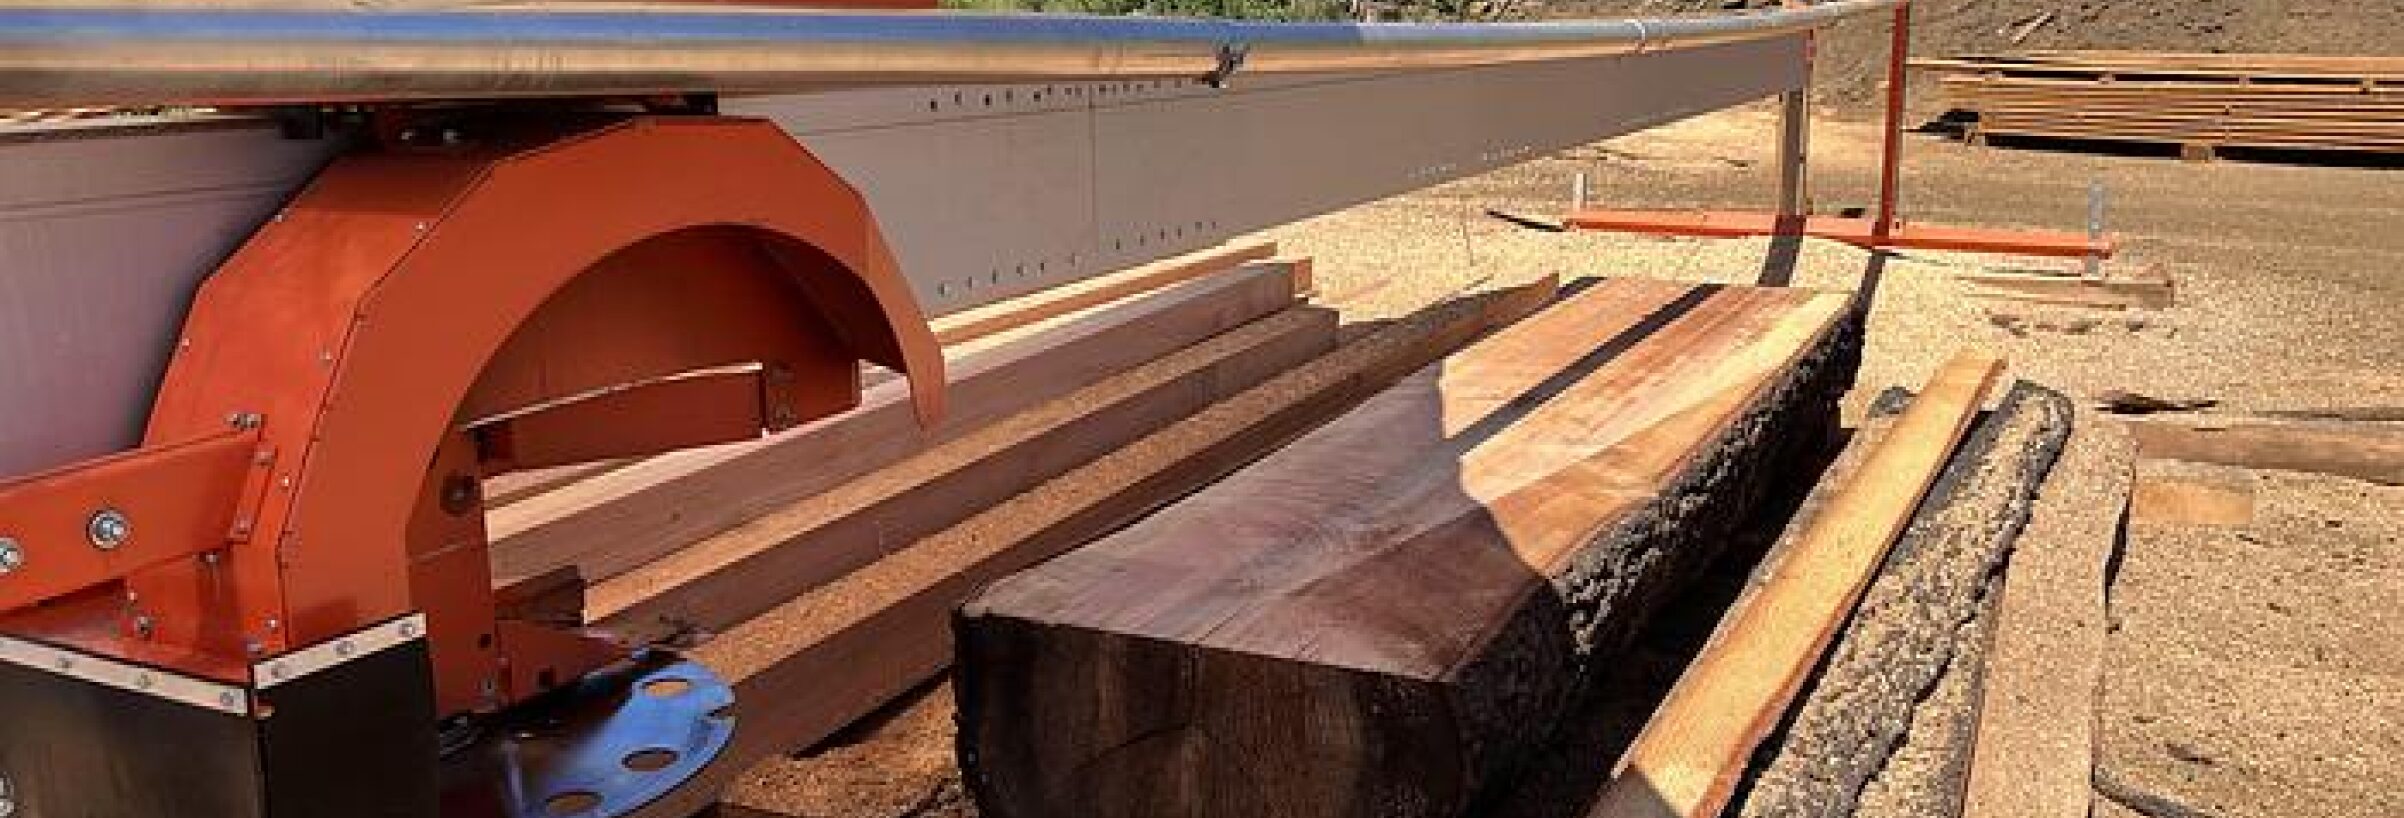 A portable sawmill cuts timber into usable lengths of wood.